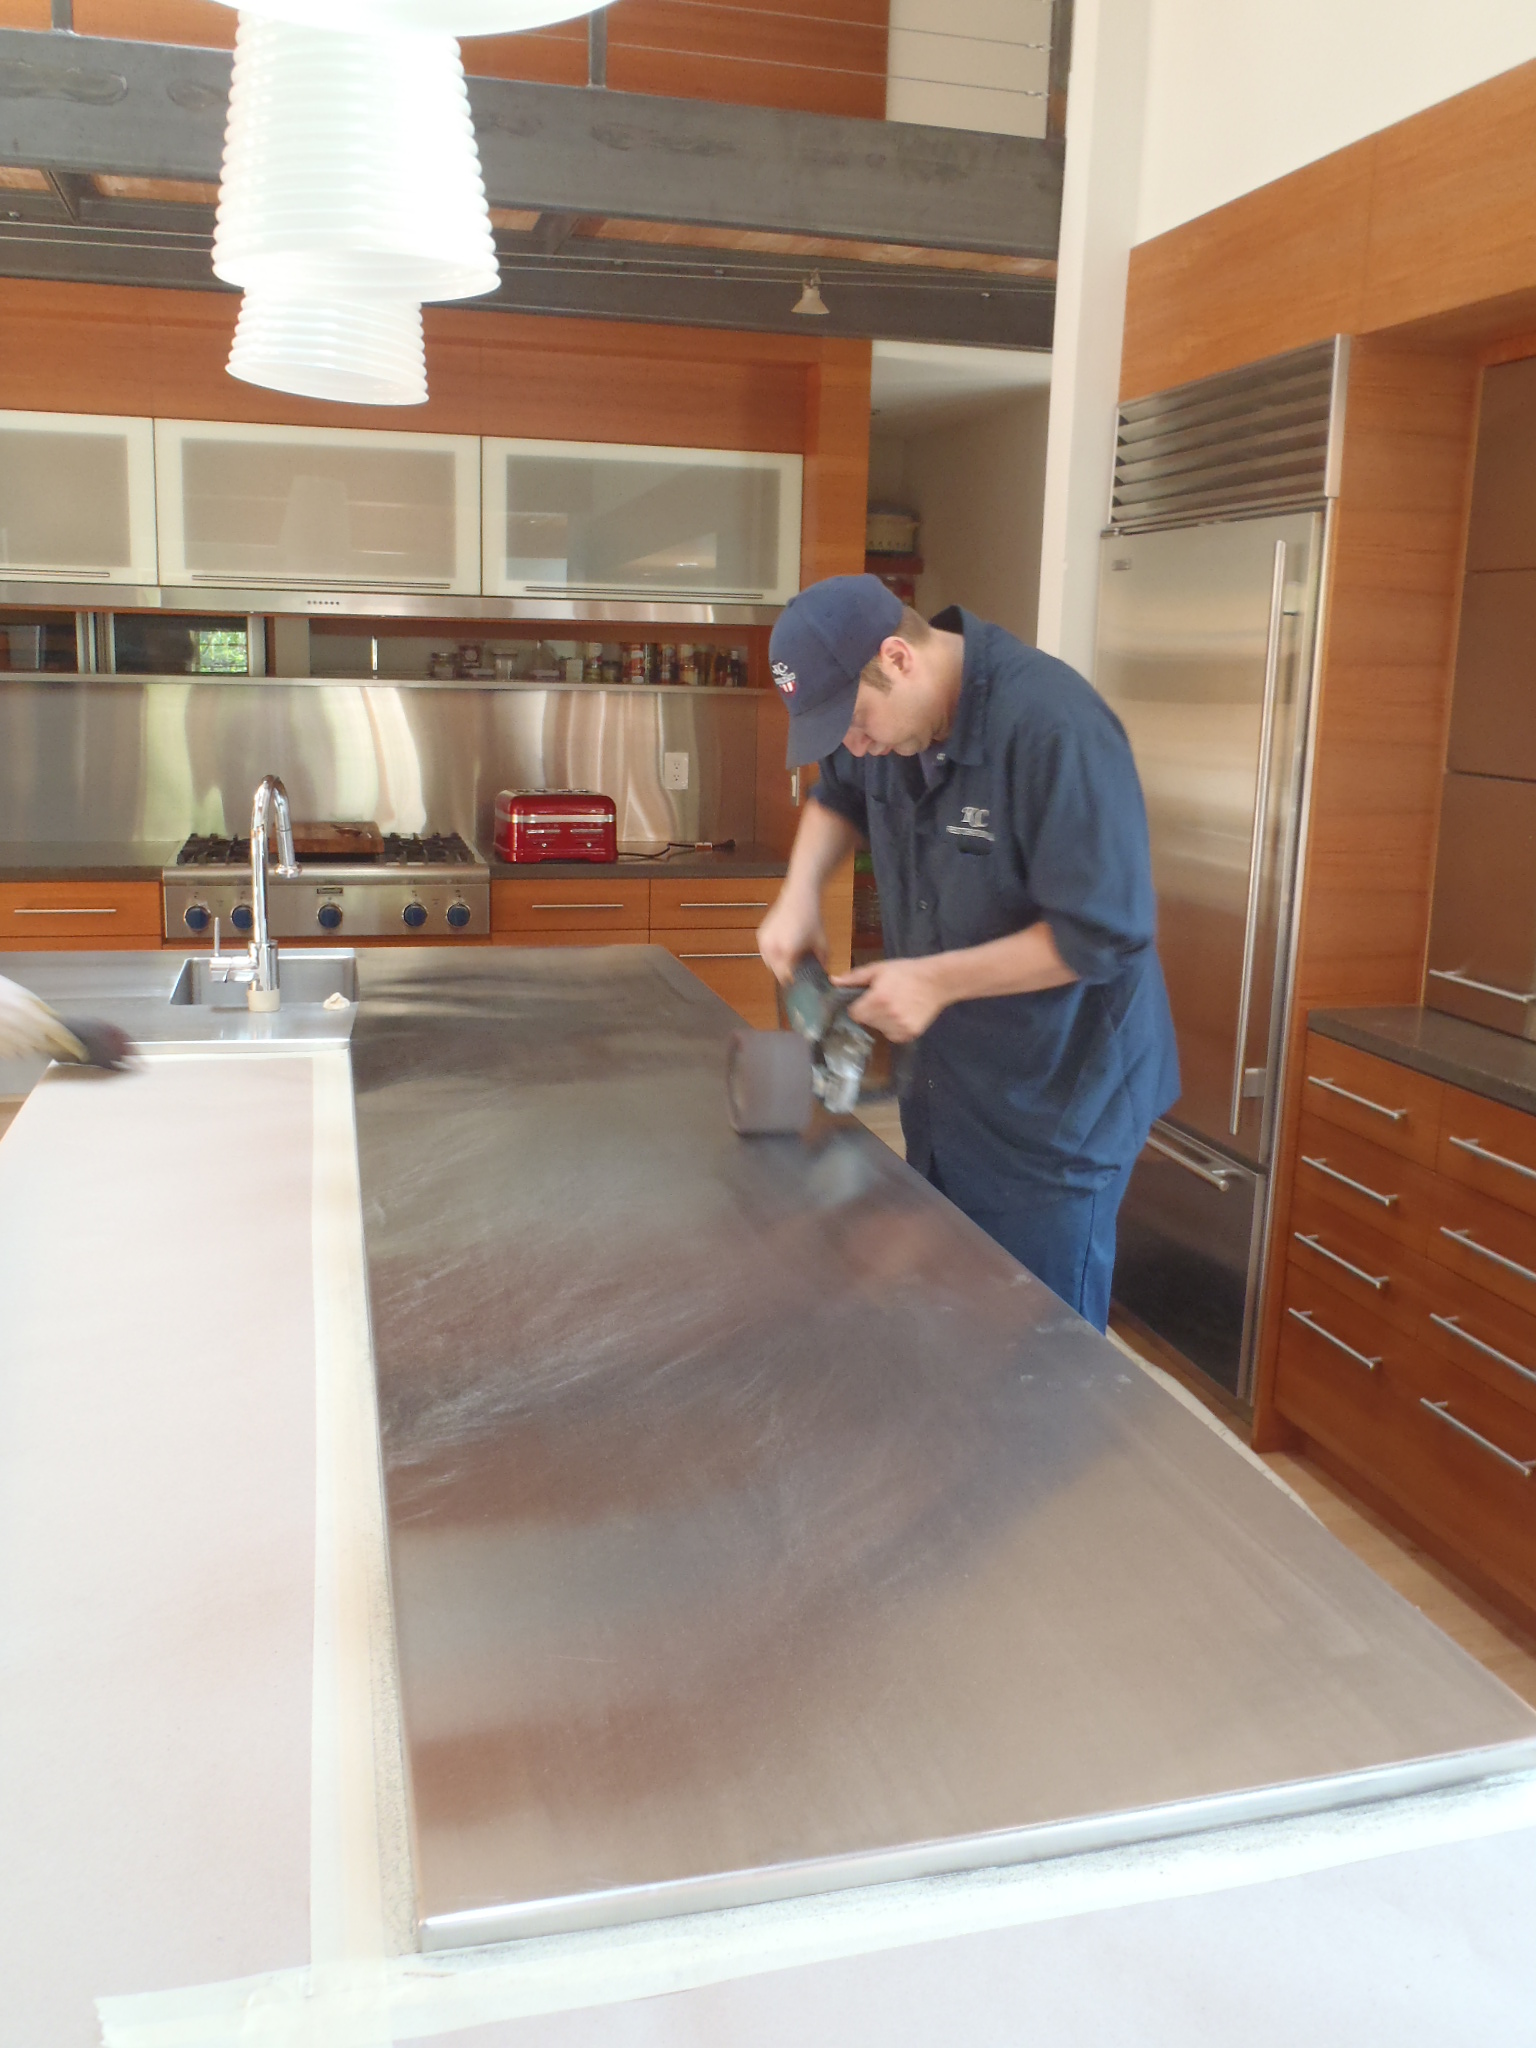 Stainless steel counter